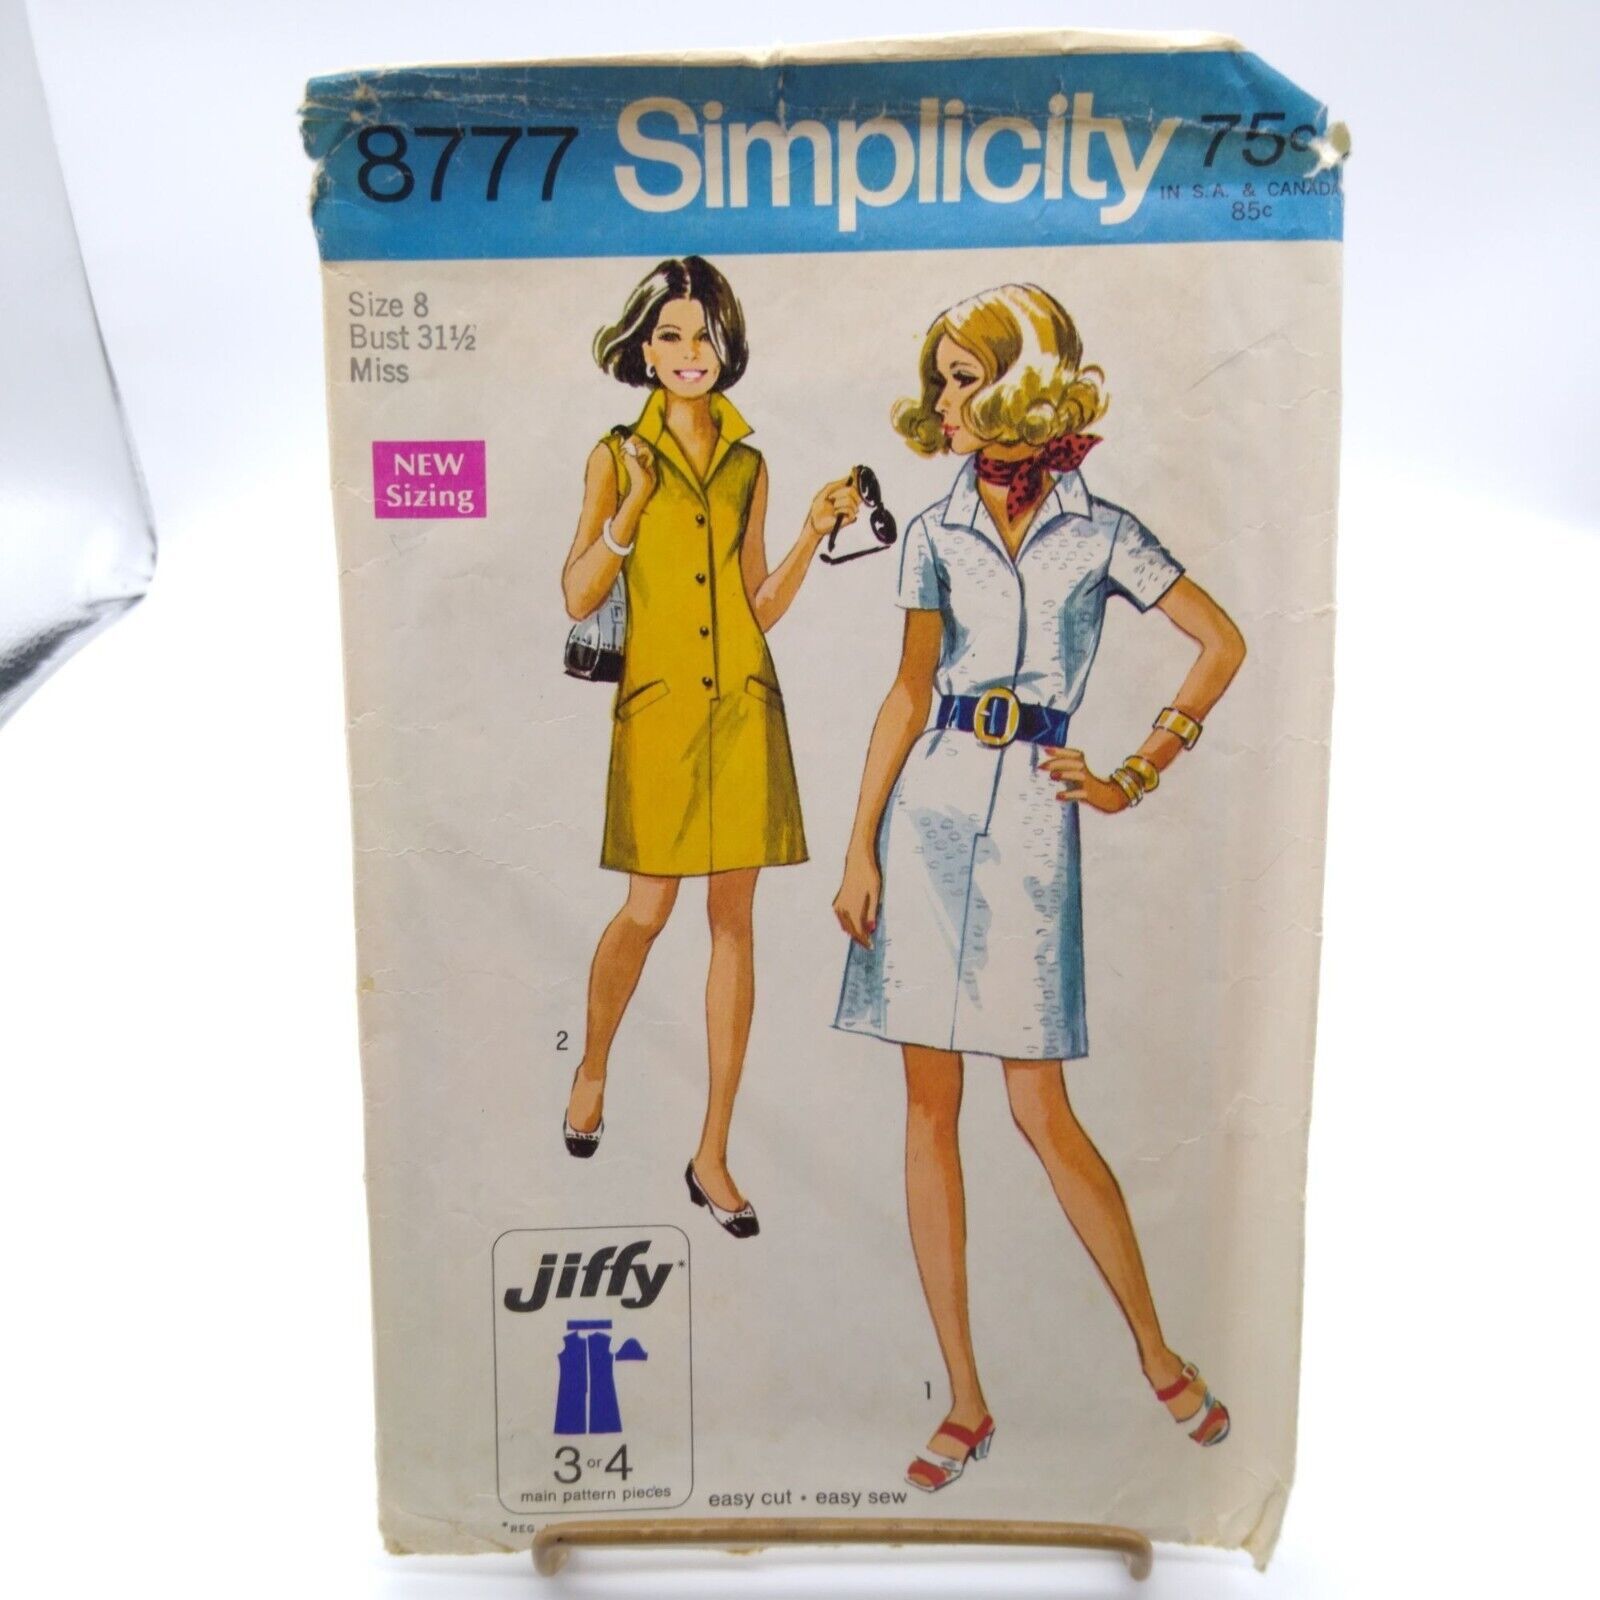 Vintage Sewing PATTERN Simplicity 8777, Jiffy Misses 1970 Simple to Sew Dress - $11.65